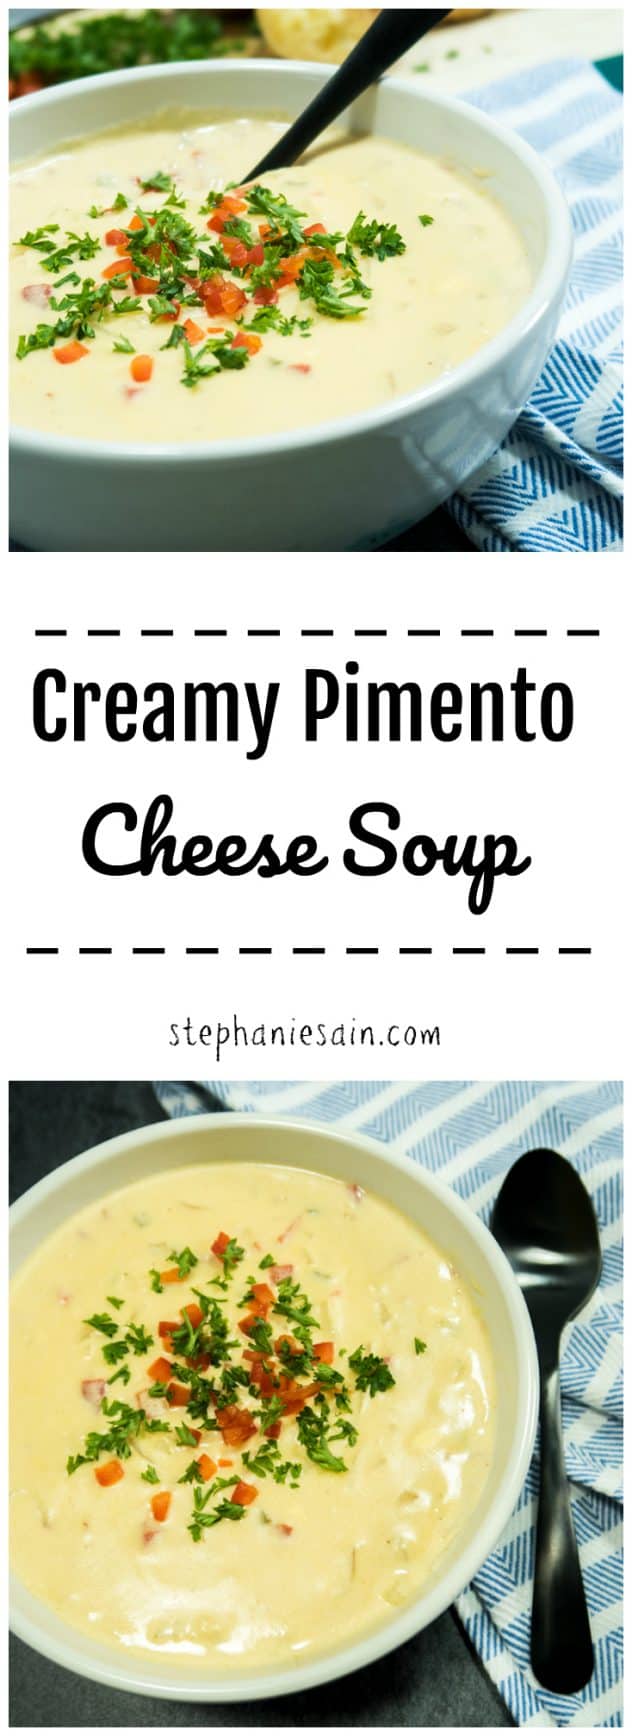 Creamy Pimento Cheese Soup is a thick, velvety smooth soup loaded with cheesy goodness & pimentos. Quick & Easy dinner the whole family will love. Vegetarian & Gluten Free.